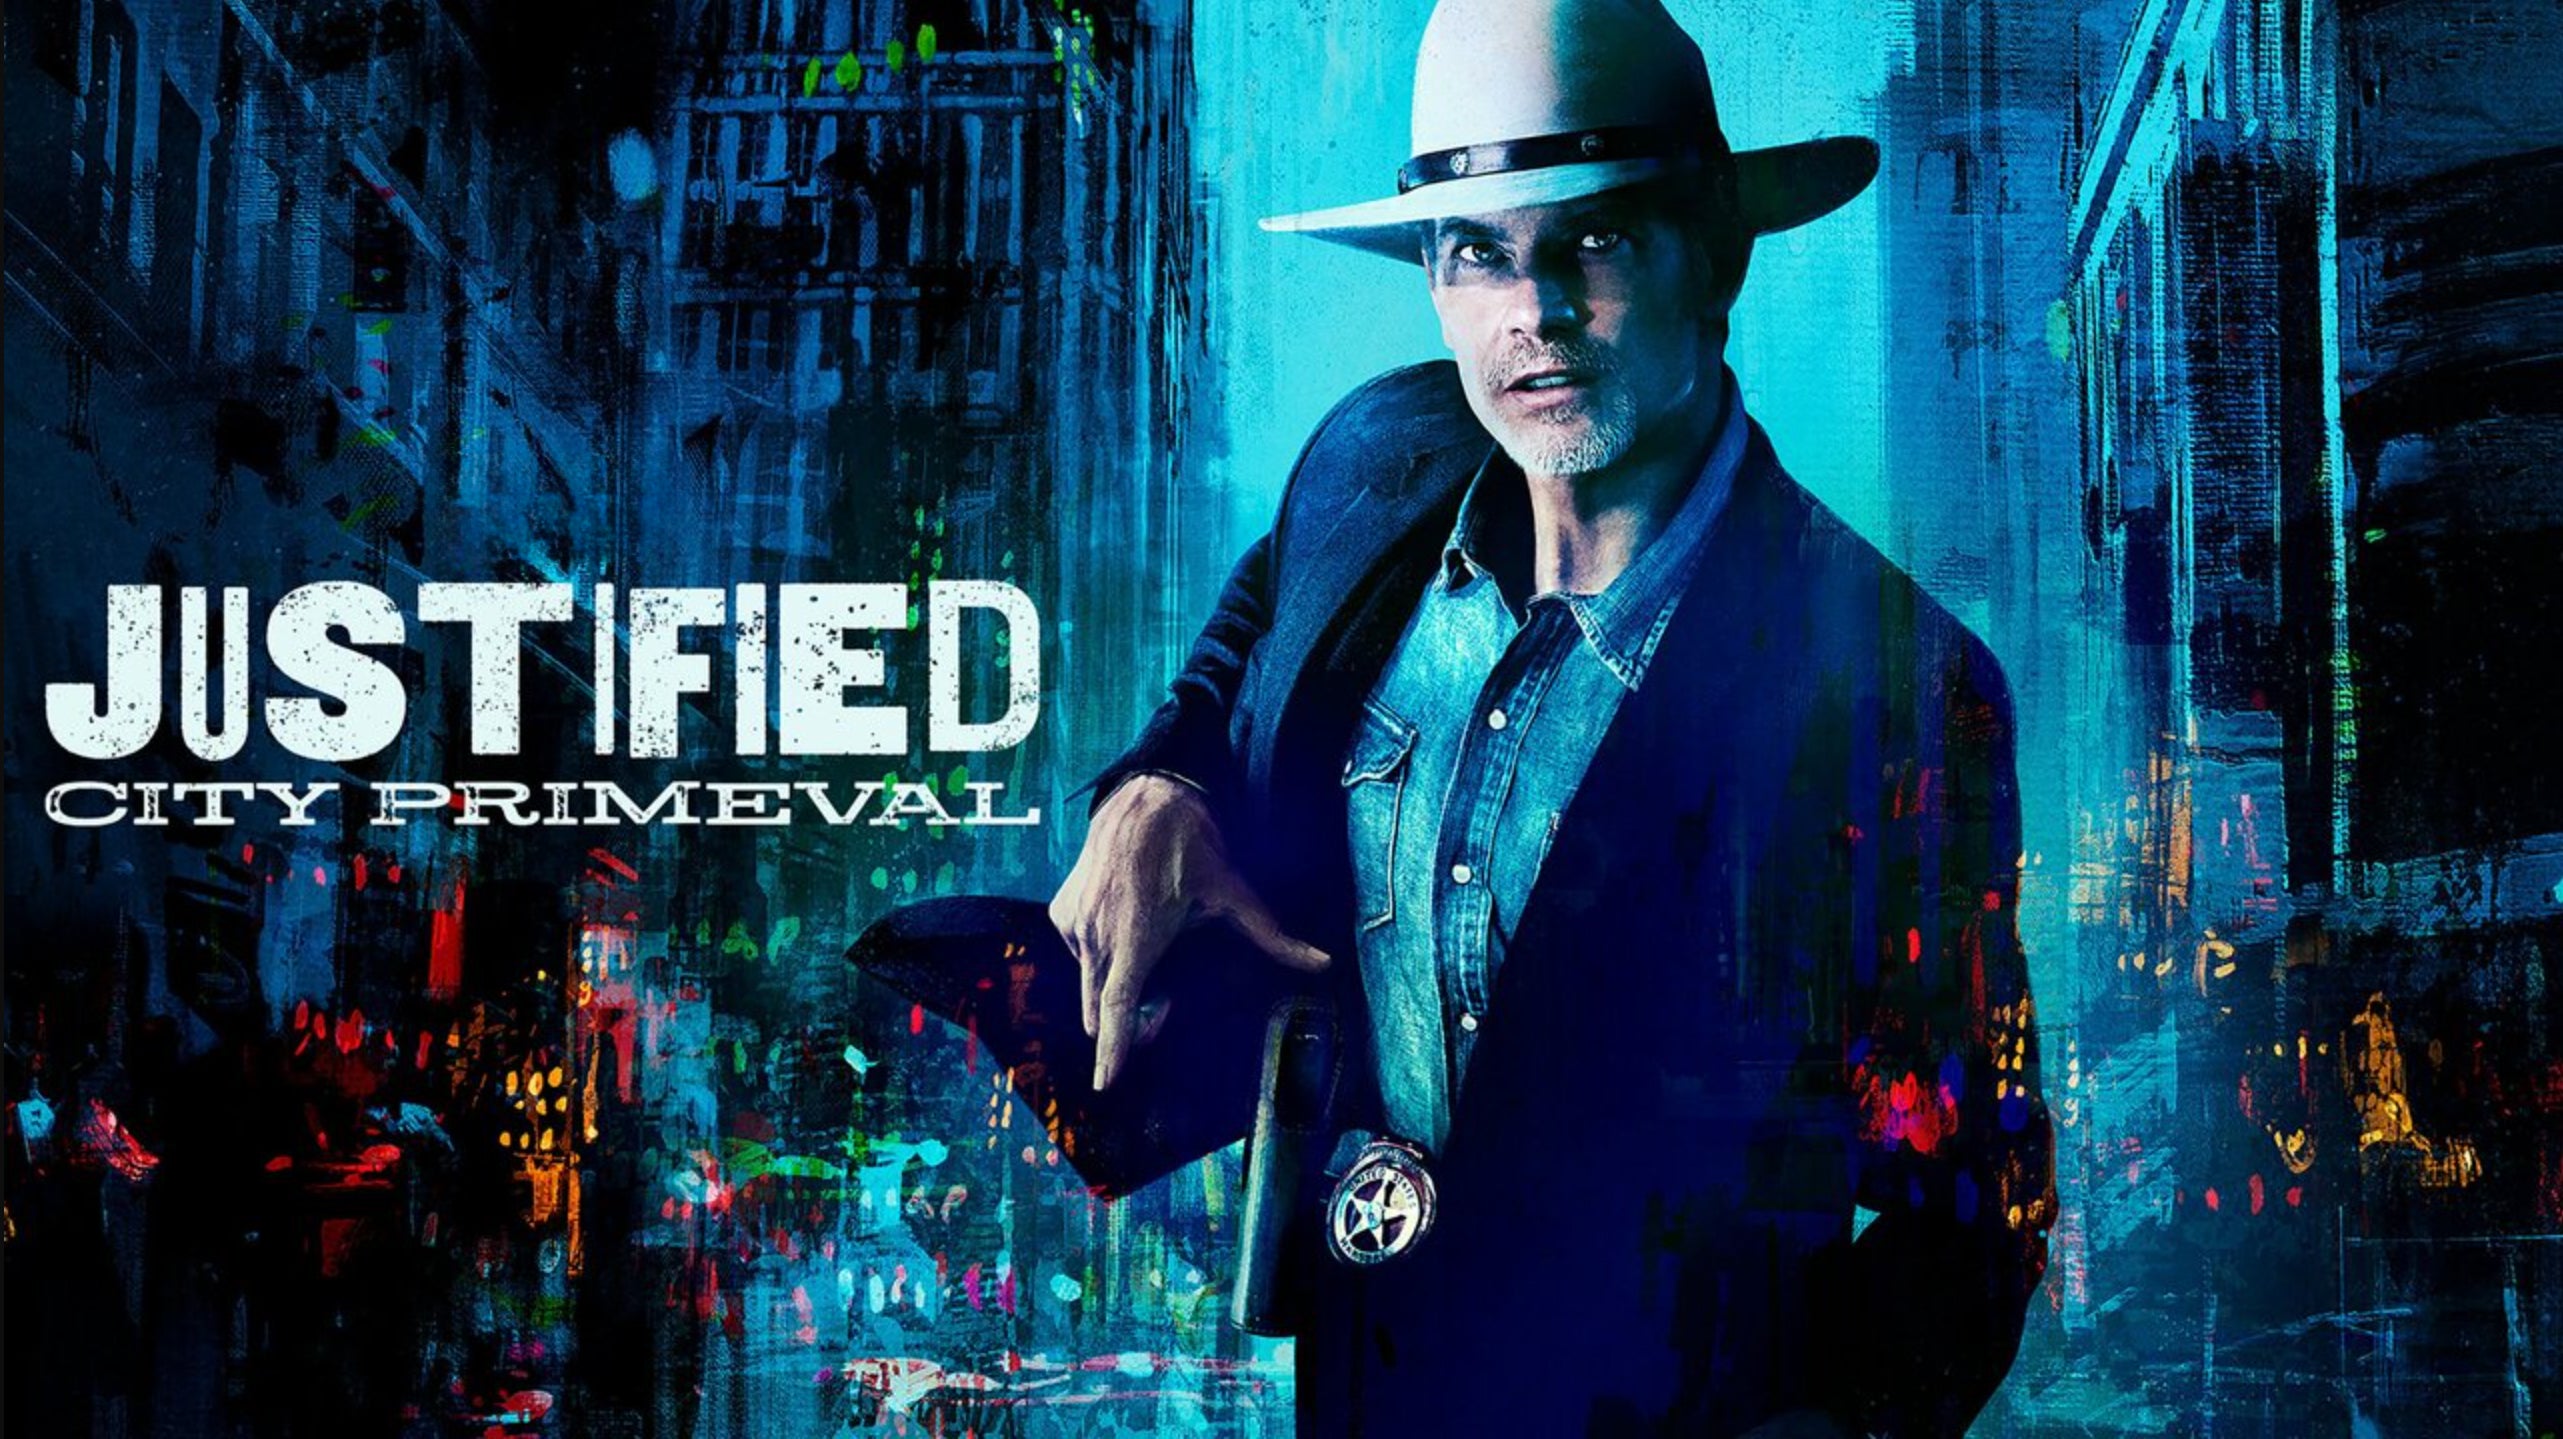 City Primeval High Noon in Detroit - Image from TV Series Show Justified